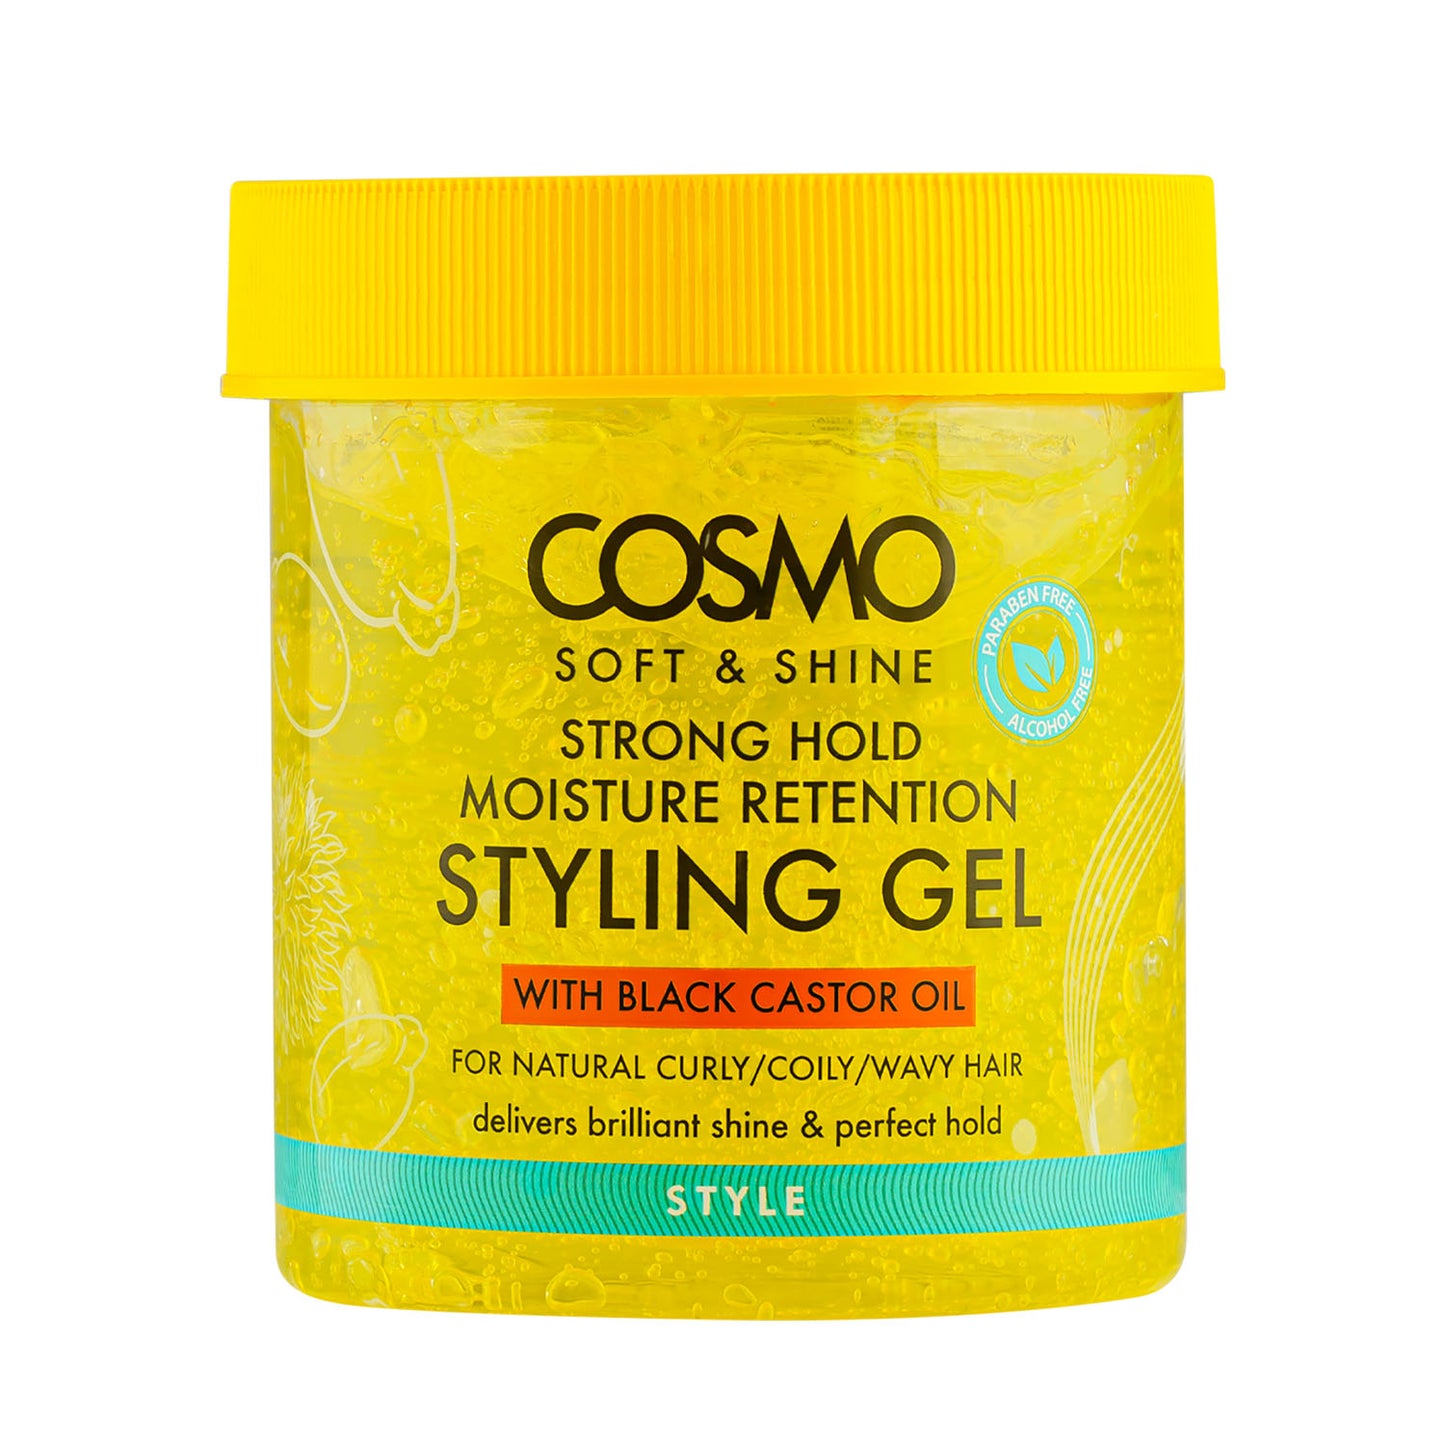 COSMO SOFT & SHINE STRONG HOLD STYLING GEL - 450G